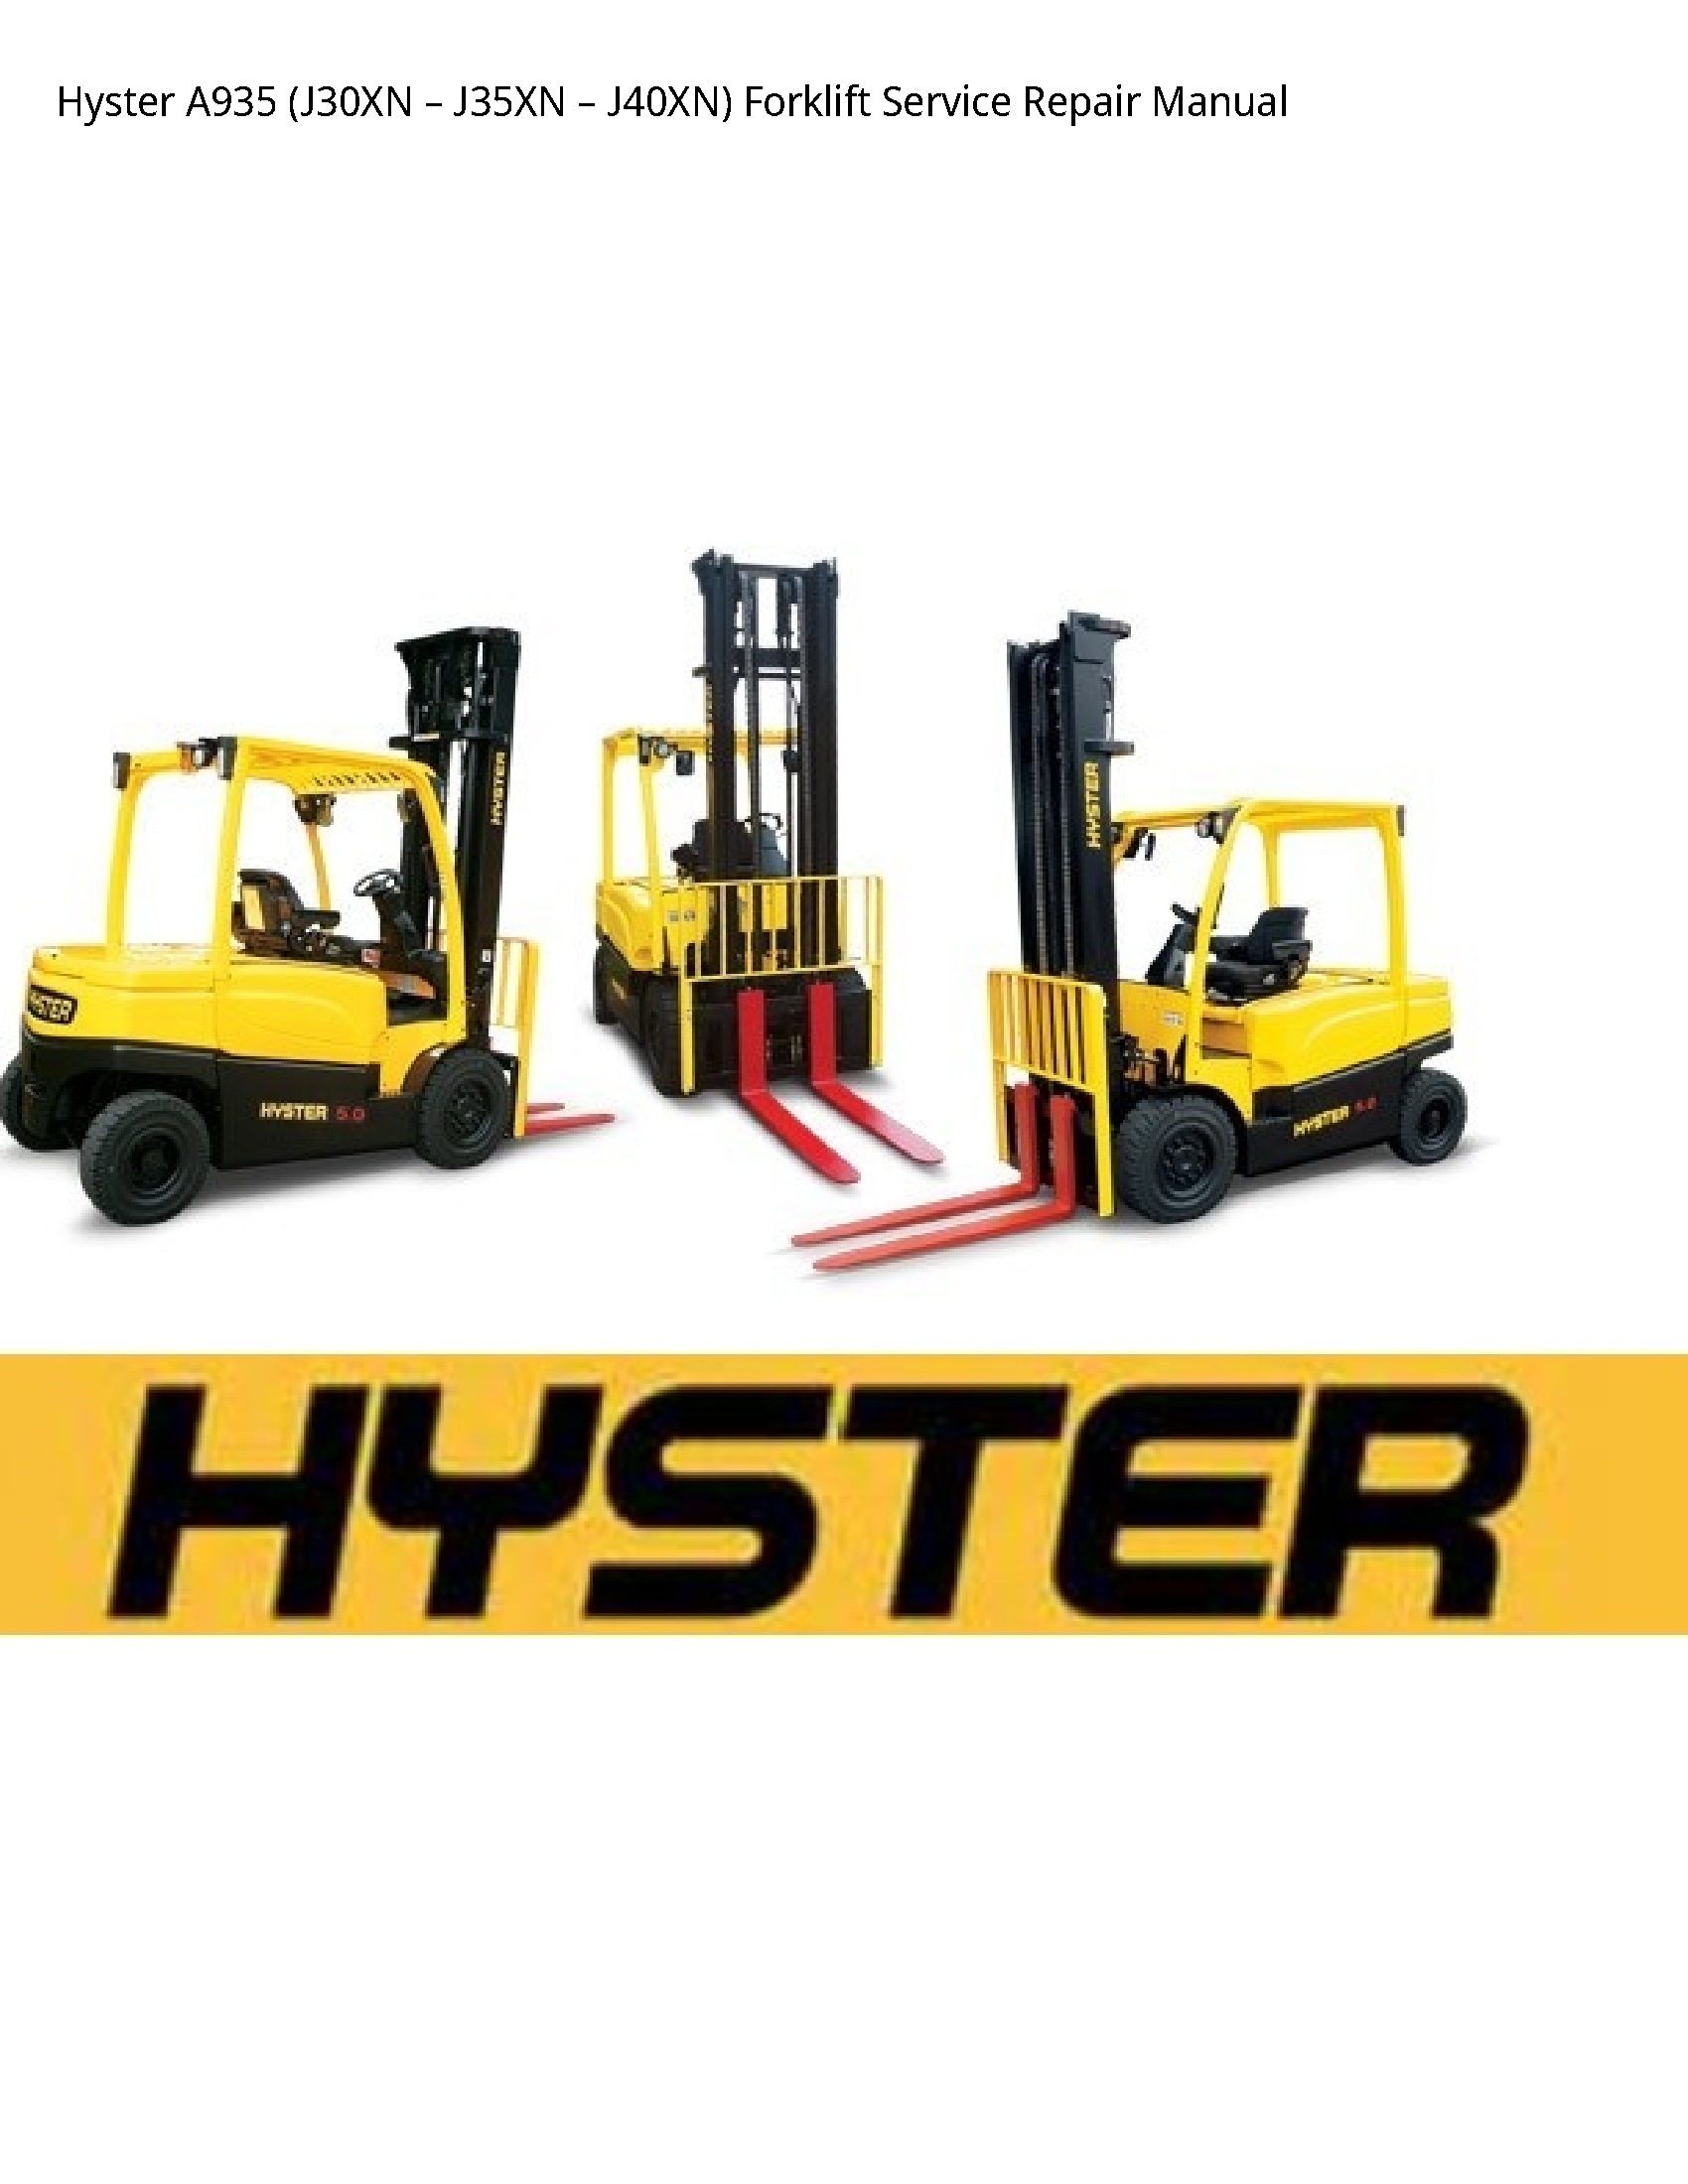 Hyster A935 Forklift manual